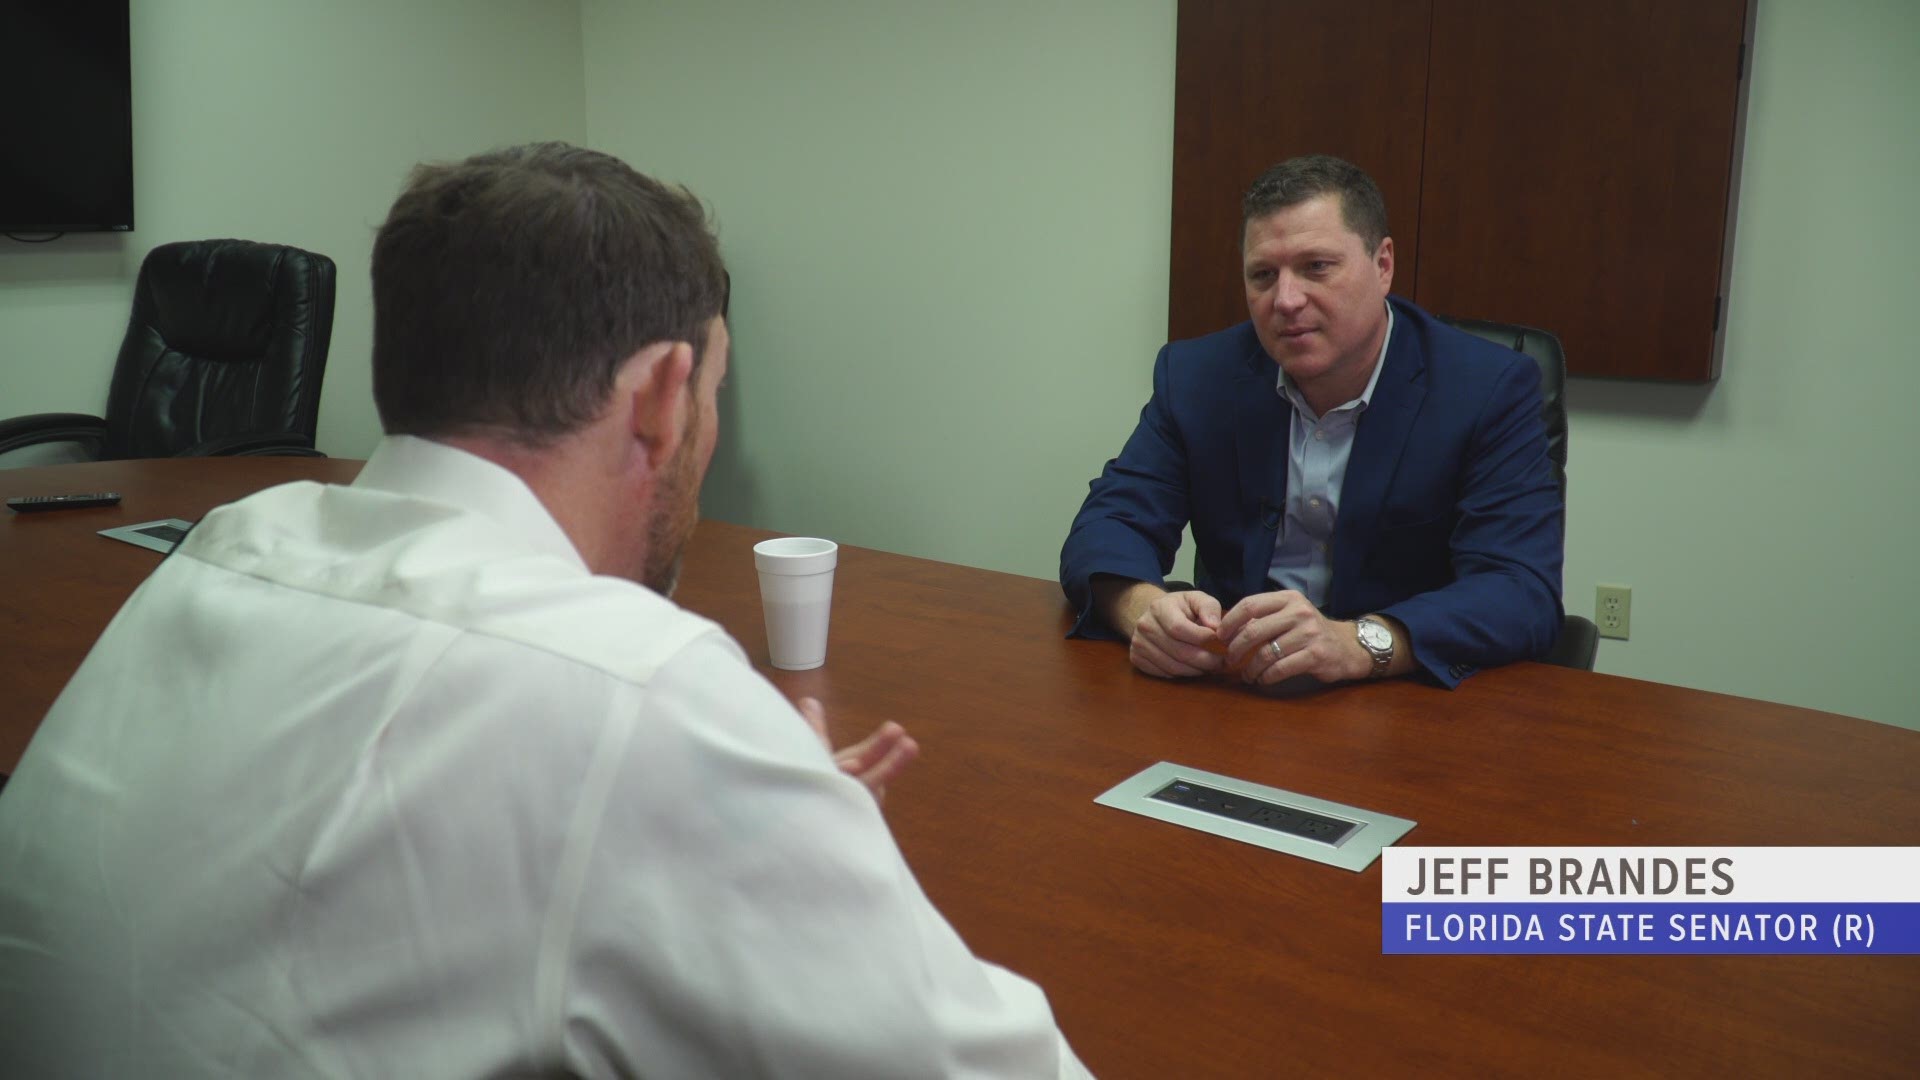 State Sen. Jeff Brandes (R) has concerns about what could happen in Pinellas County if a storm like Hurricane Michael were to hit, but he also has concerns about the cost associated with stronger building codes.